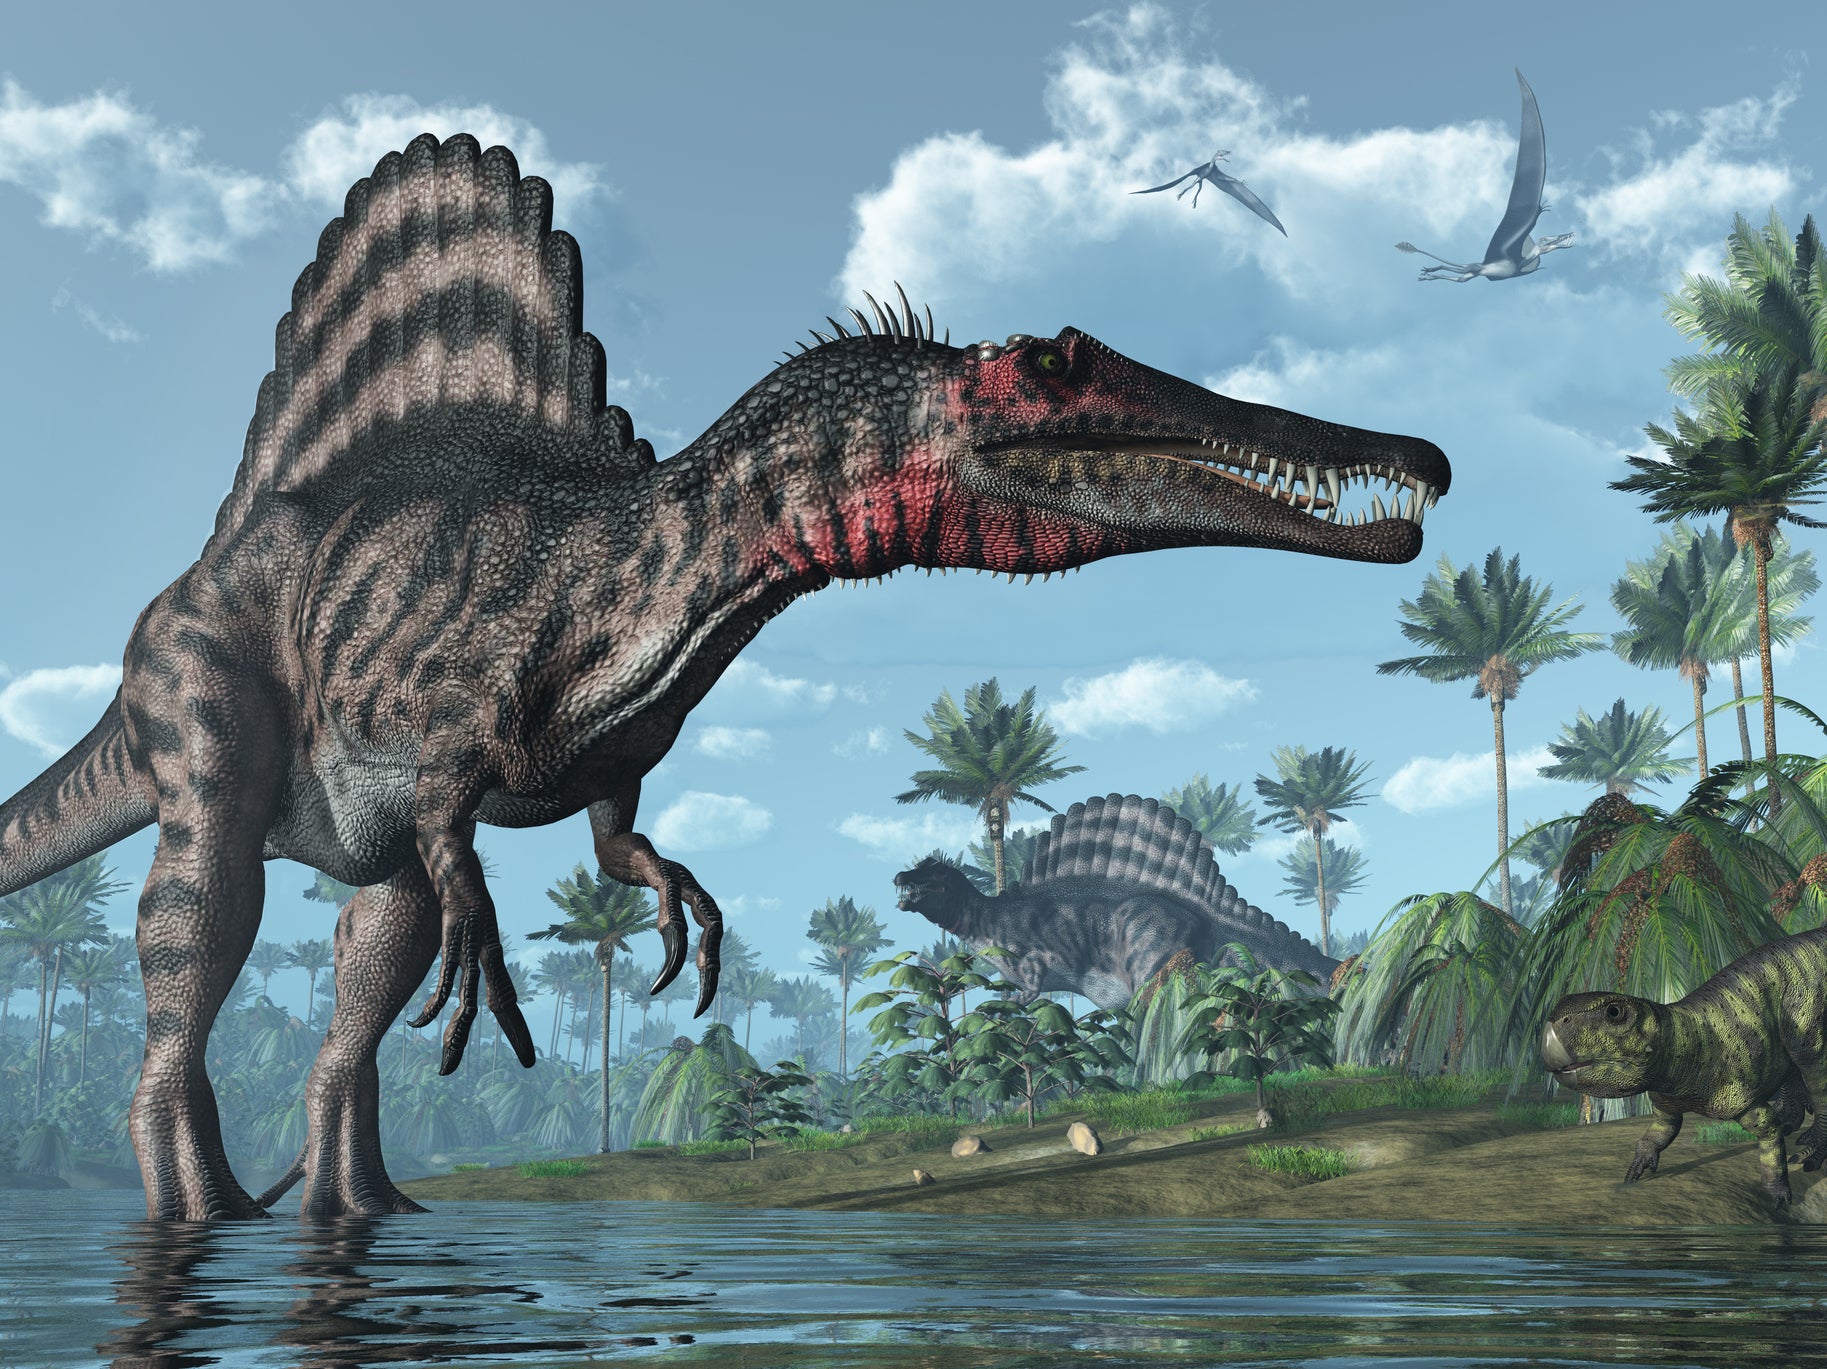 What Was the Most Dangerous Carnivorous Dinosaur?